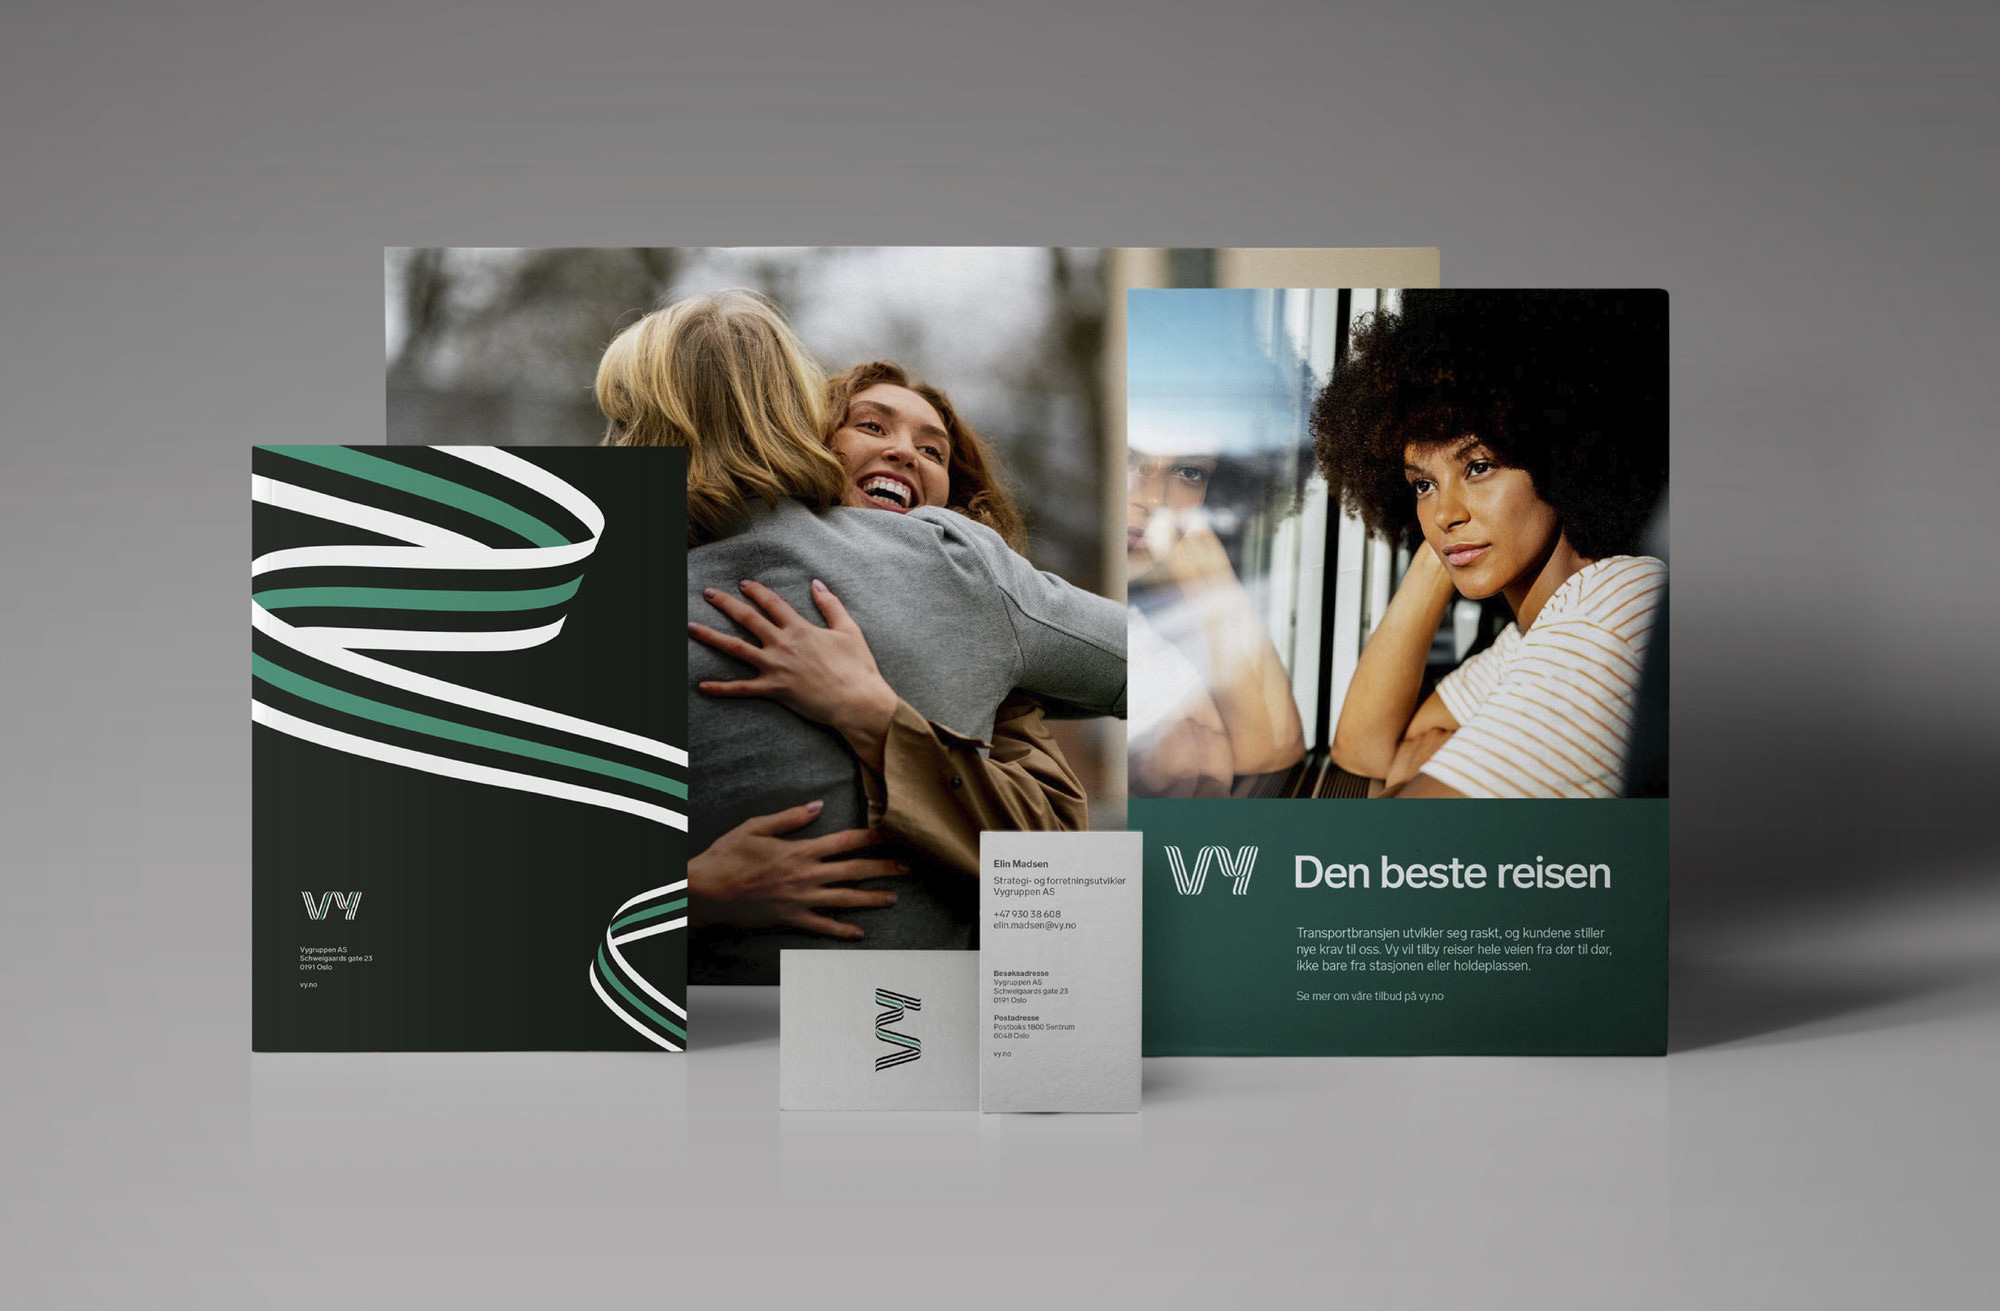 New Logo and Identity for Vy by Snøhetta